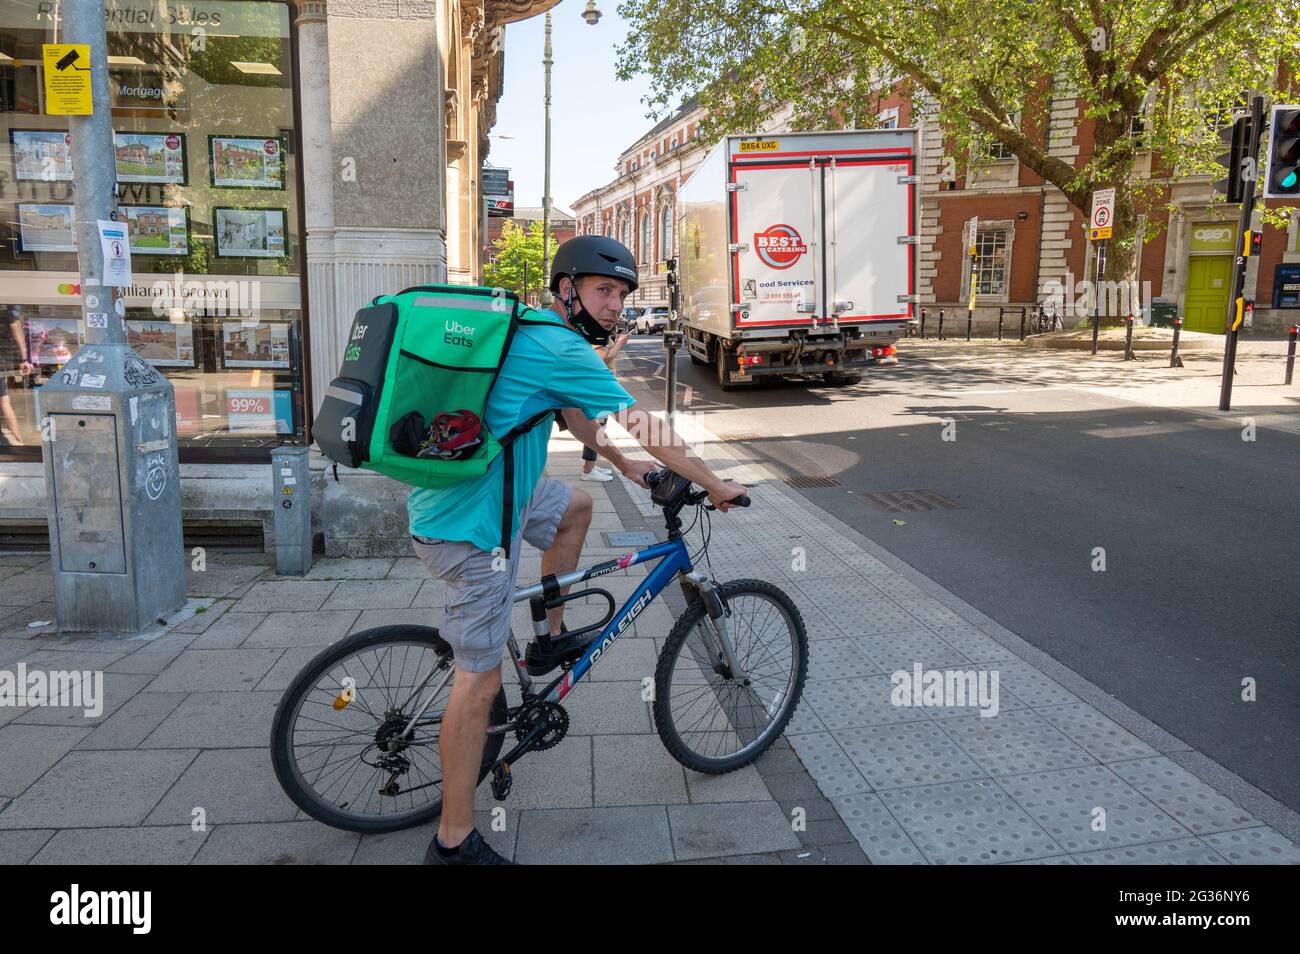 Uber eats take away  delivery man on a bicycle waiting at a pedestrian crossing in norwich city centre Stock Photo